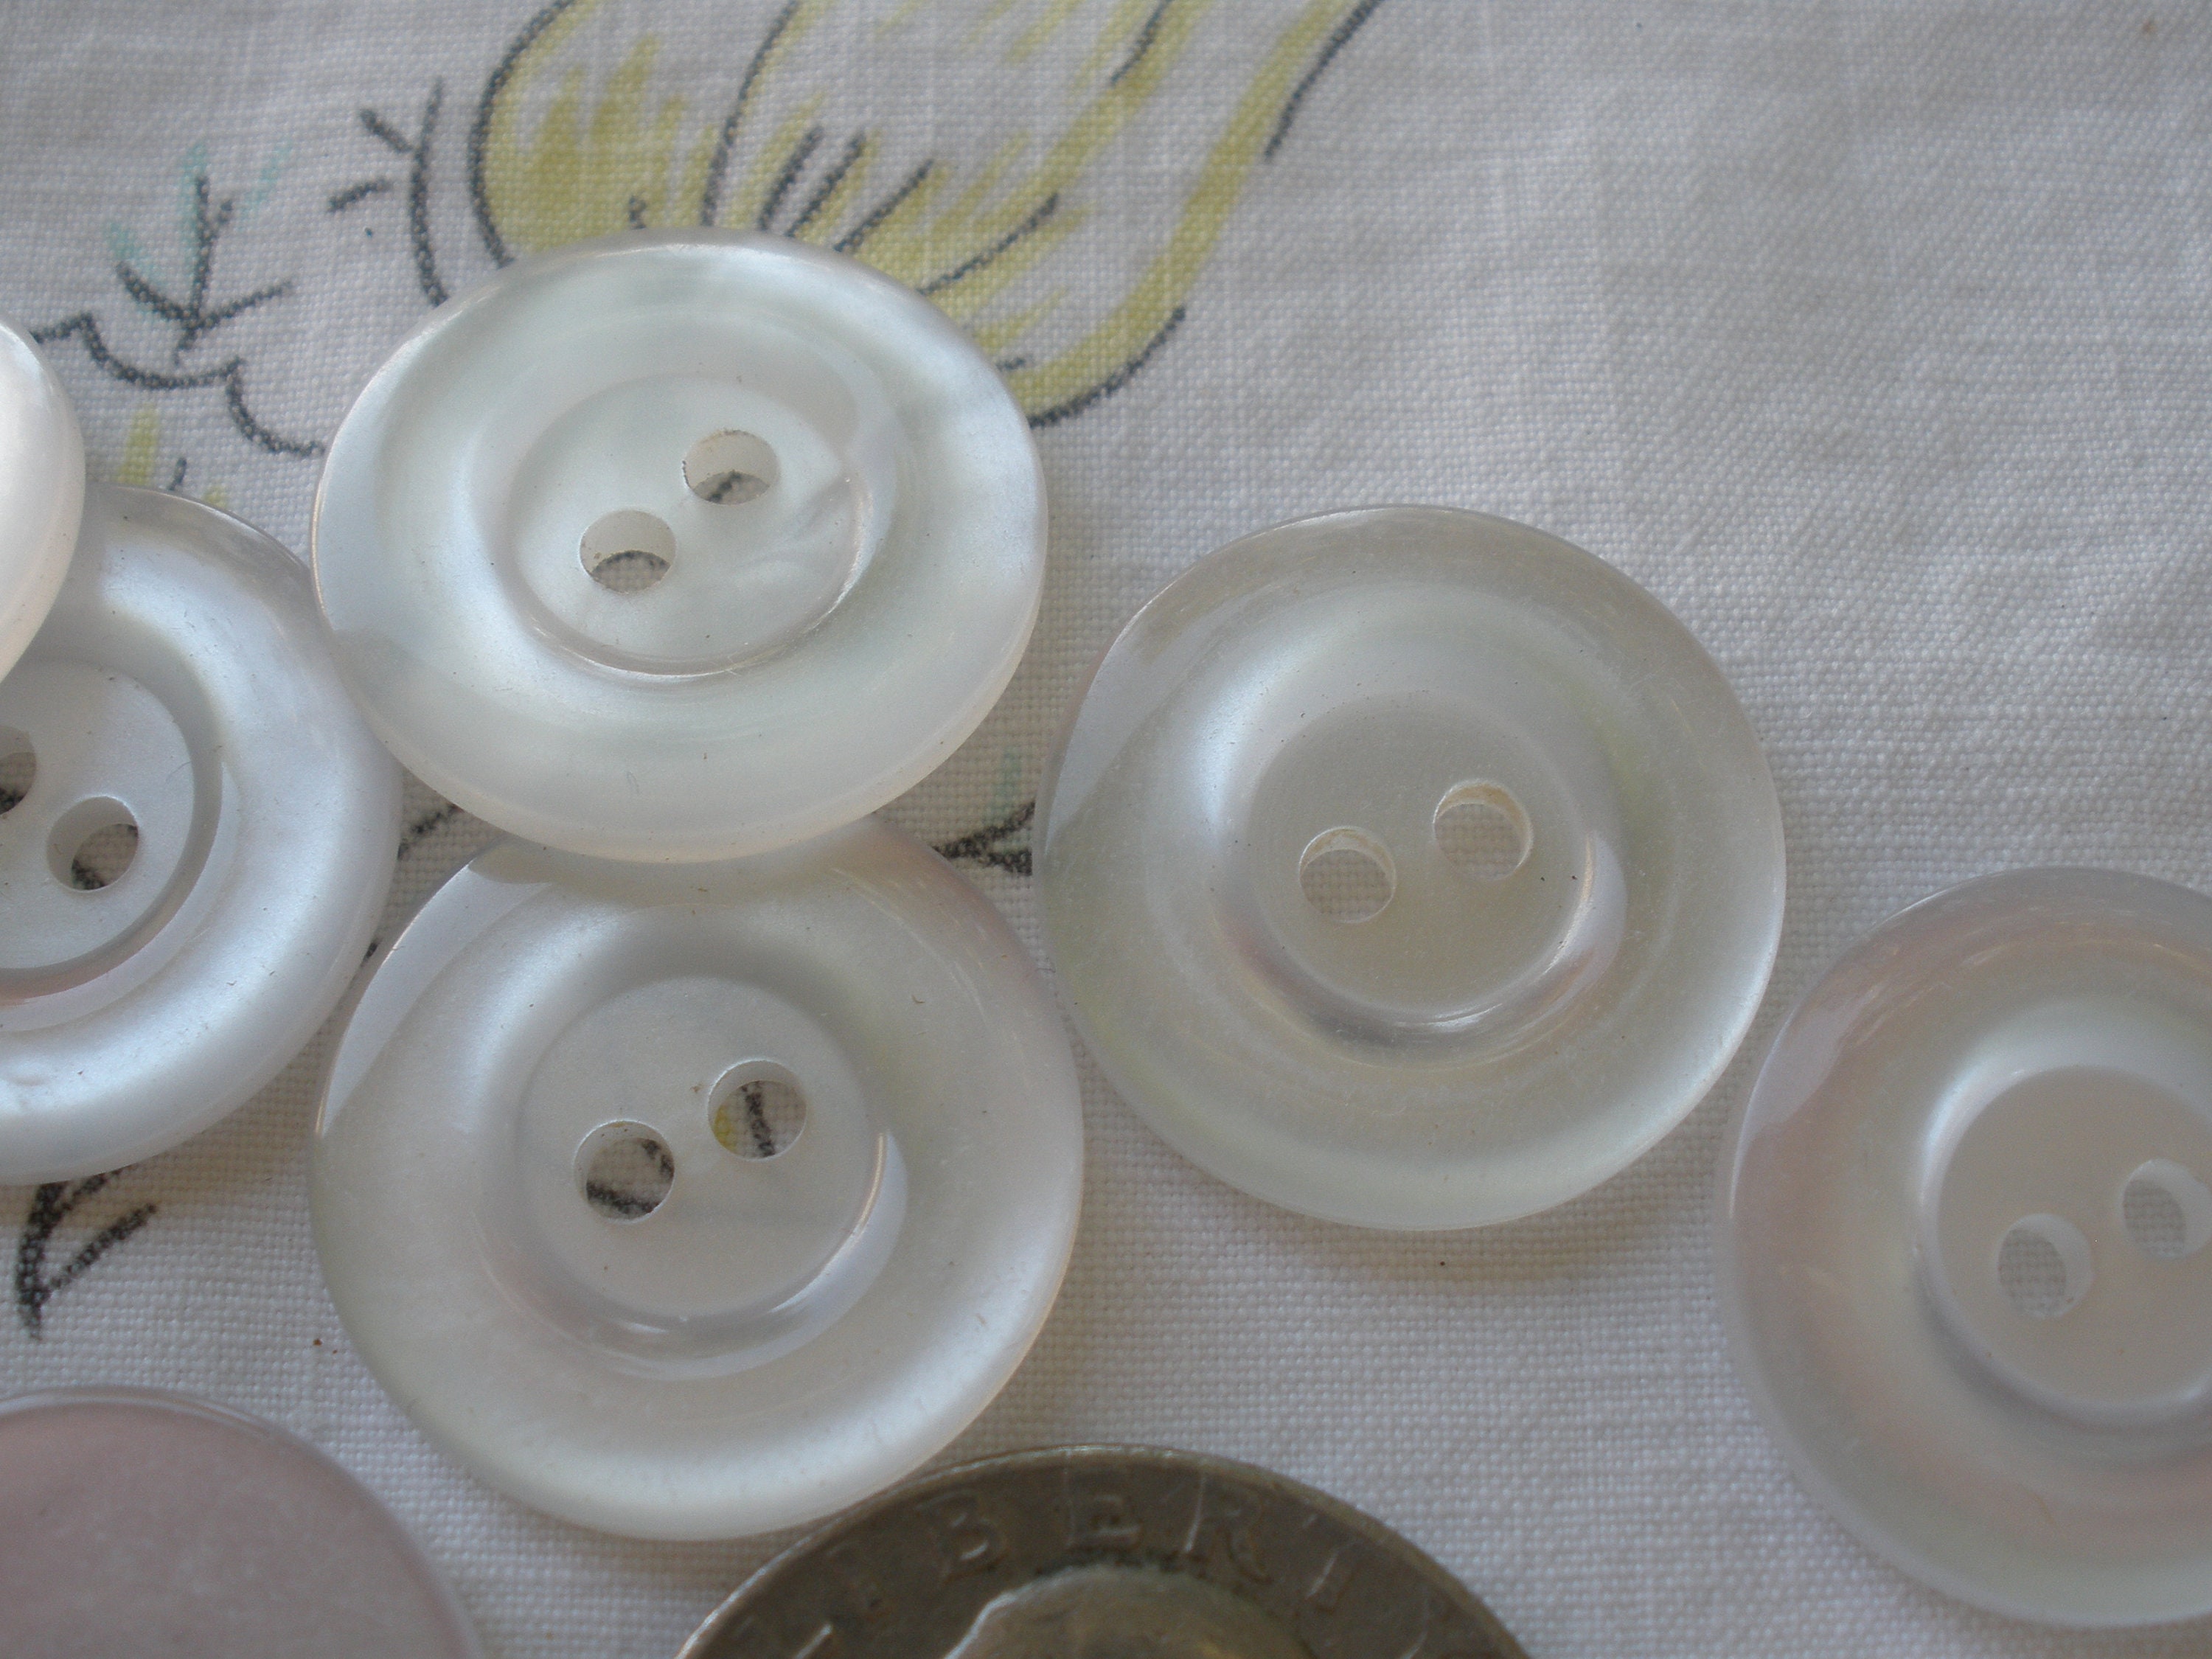 Classic Frost White Buttons 3/4 30L 19MM 24 Each With Rim Face 4 Hole Sew  on Sewing Crafts Flat Back Cool Vintage Buttons 